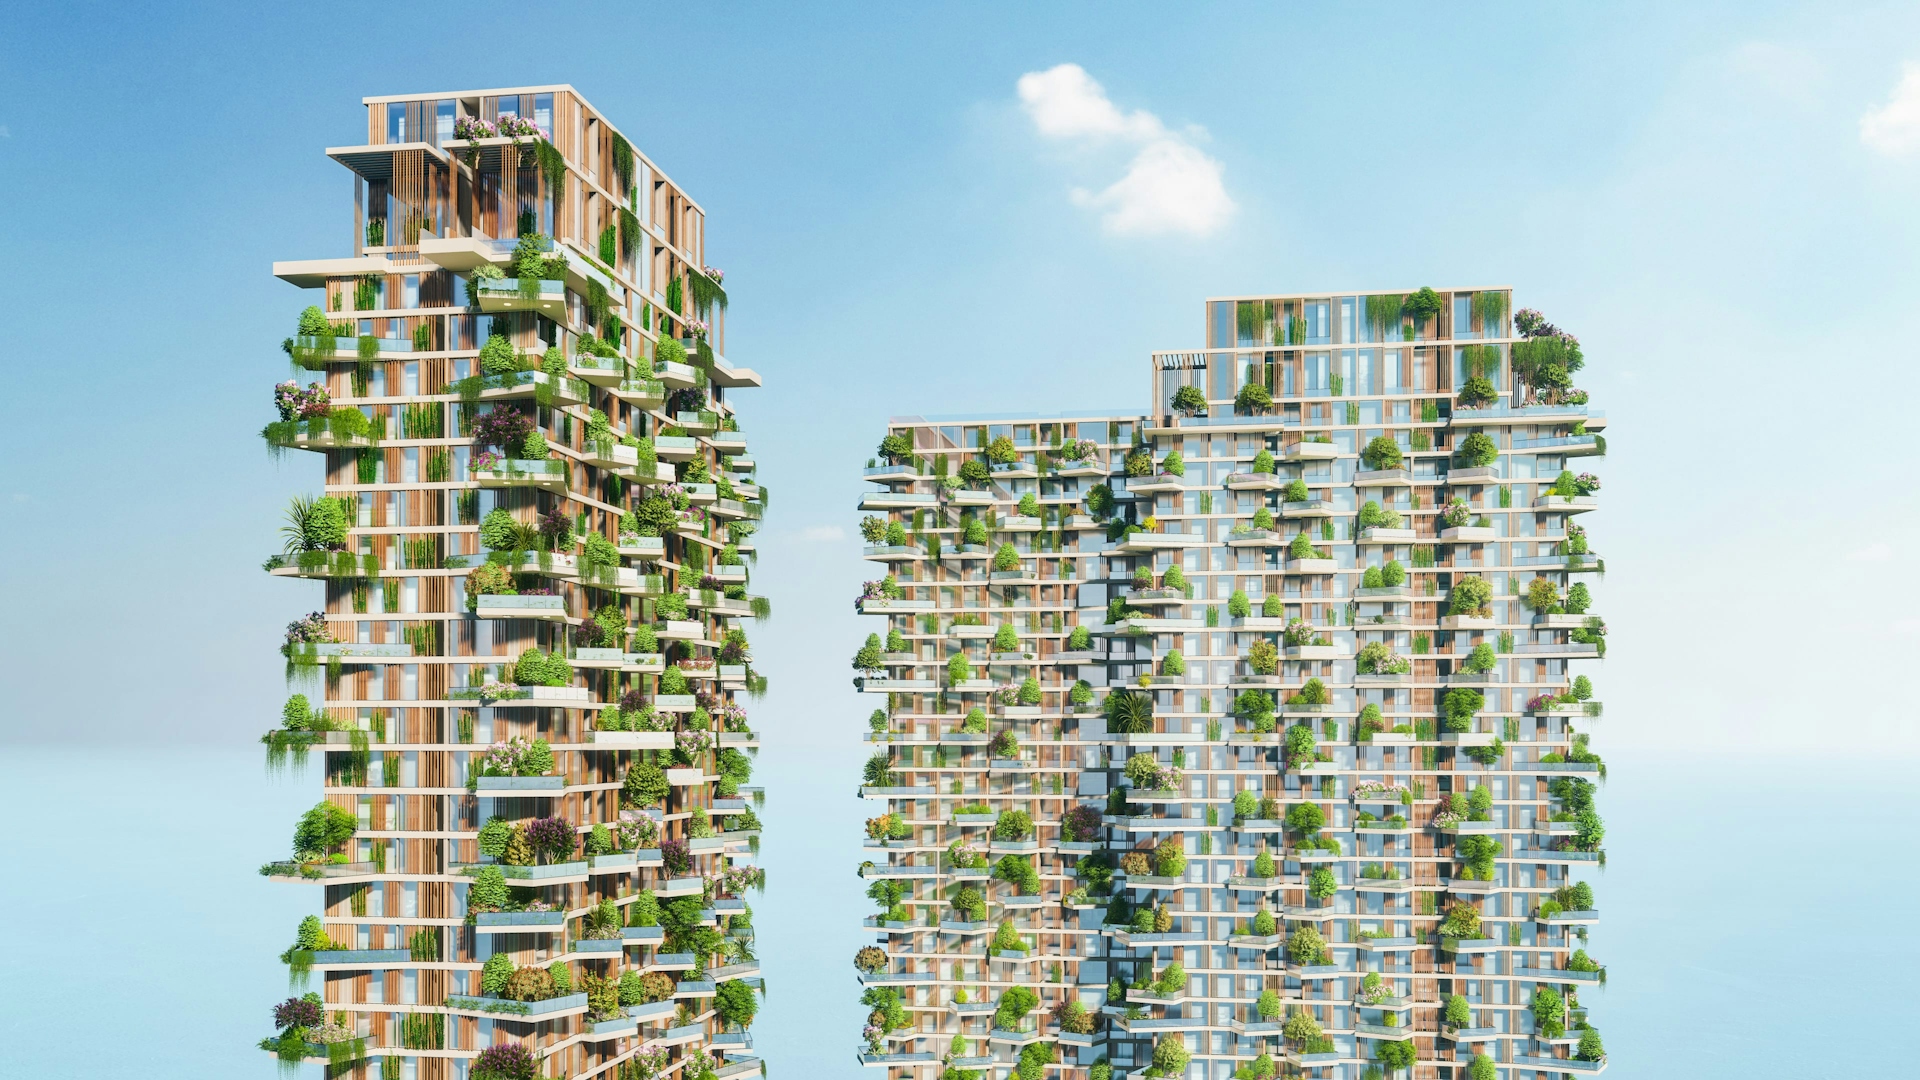 This vertical forest in Vietnam is setting a new standard in Eco-Architecture